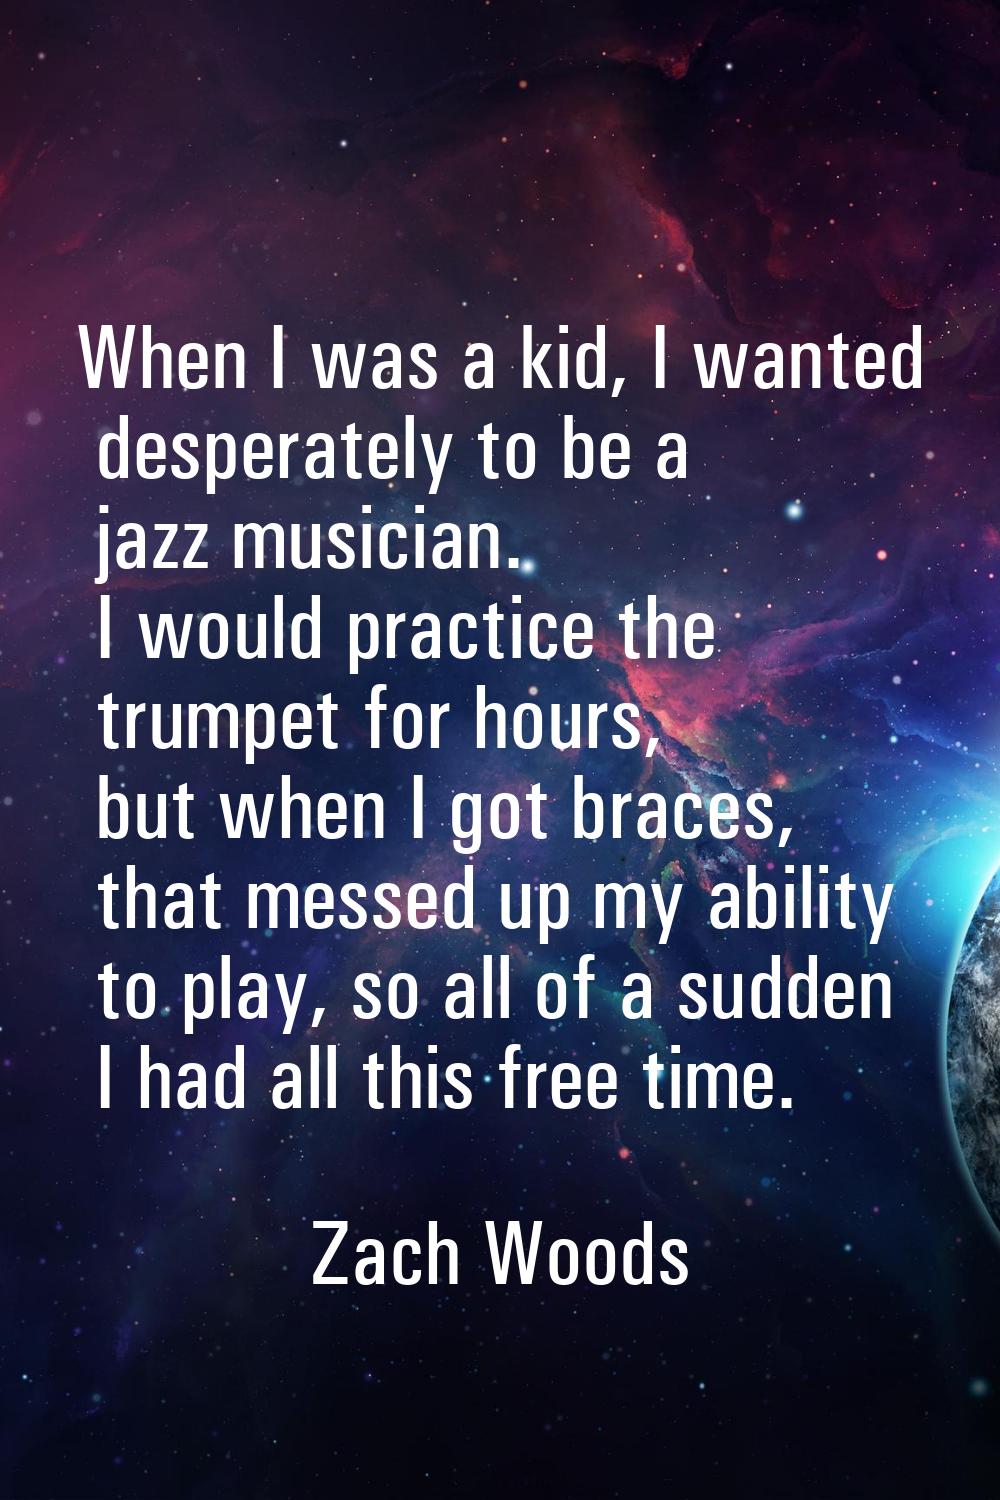 When I was a kid, I wanted desperately to be a jazz musician. I would practice the trumpet for hour